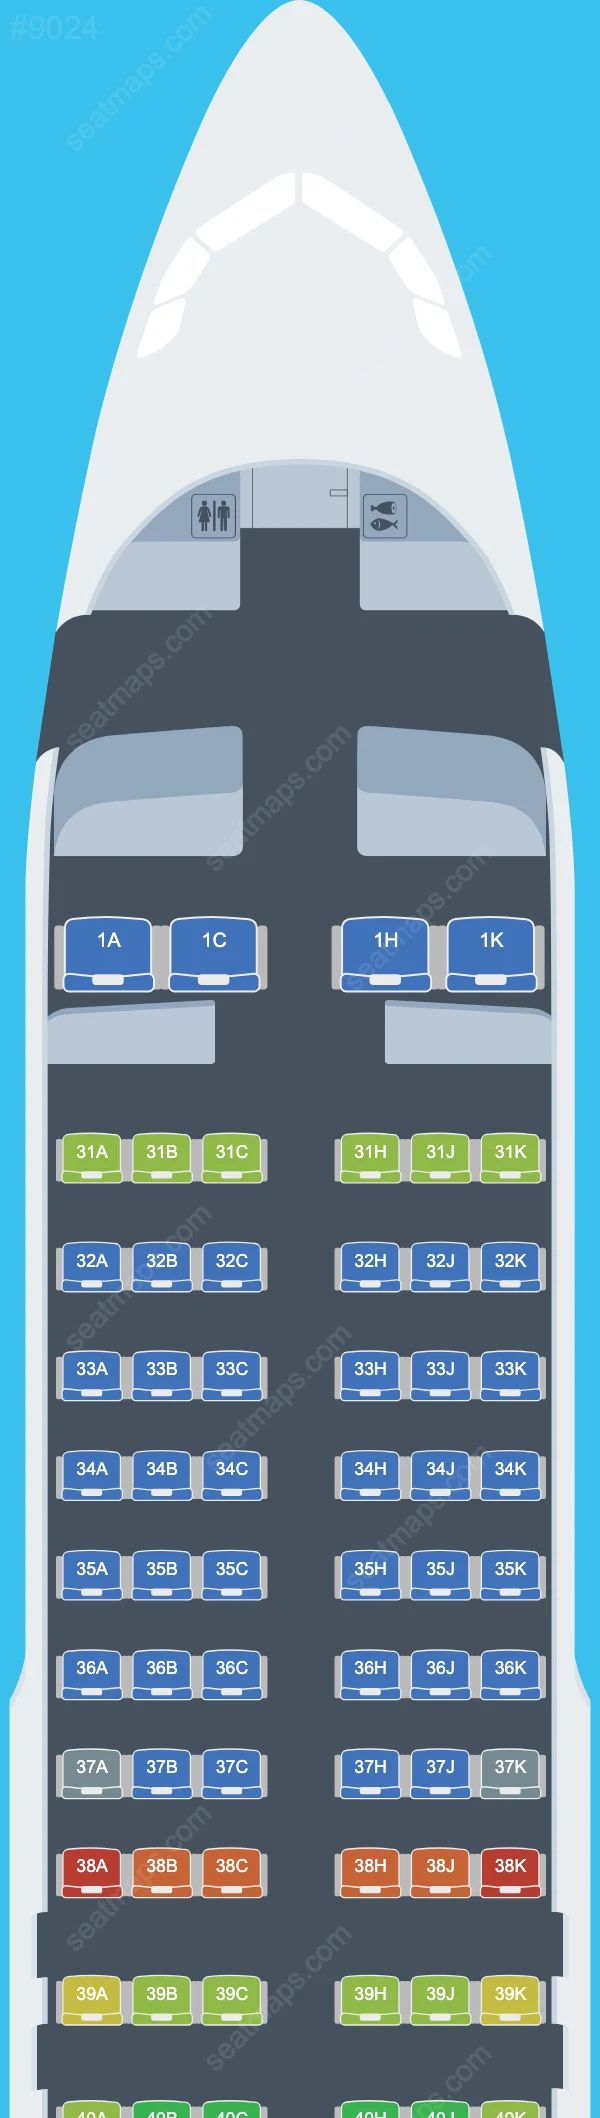 China Southern Airbus A320 Seat Maps A320-200 V.7